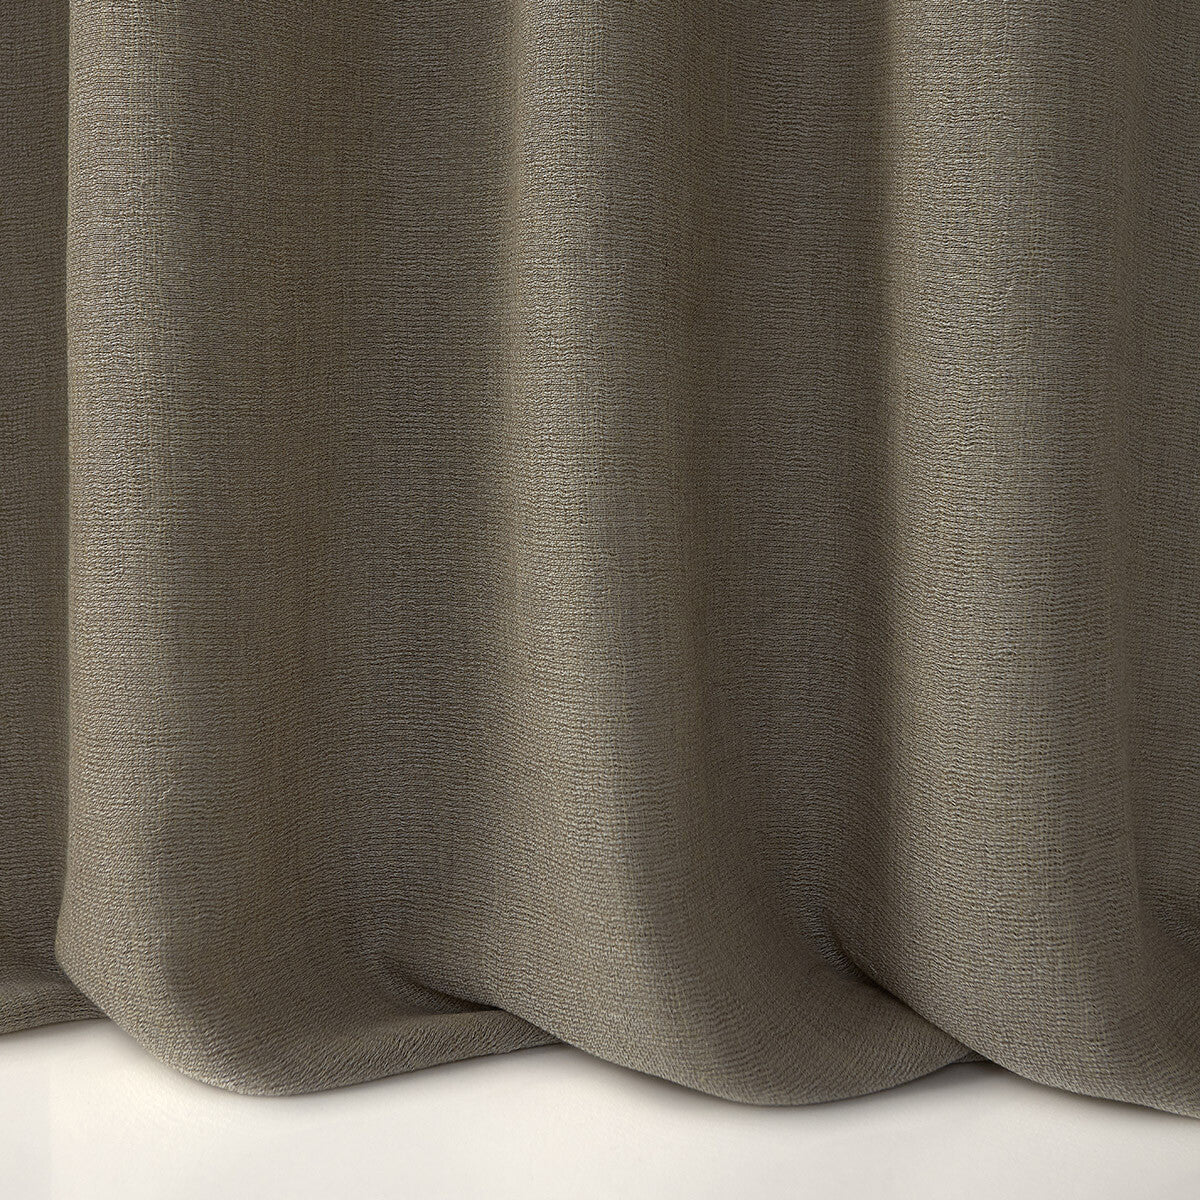 Rohe fabric in 1 color - pattern LZ-30342.01.0 - by Kravet Design in the Lizzo collection